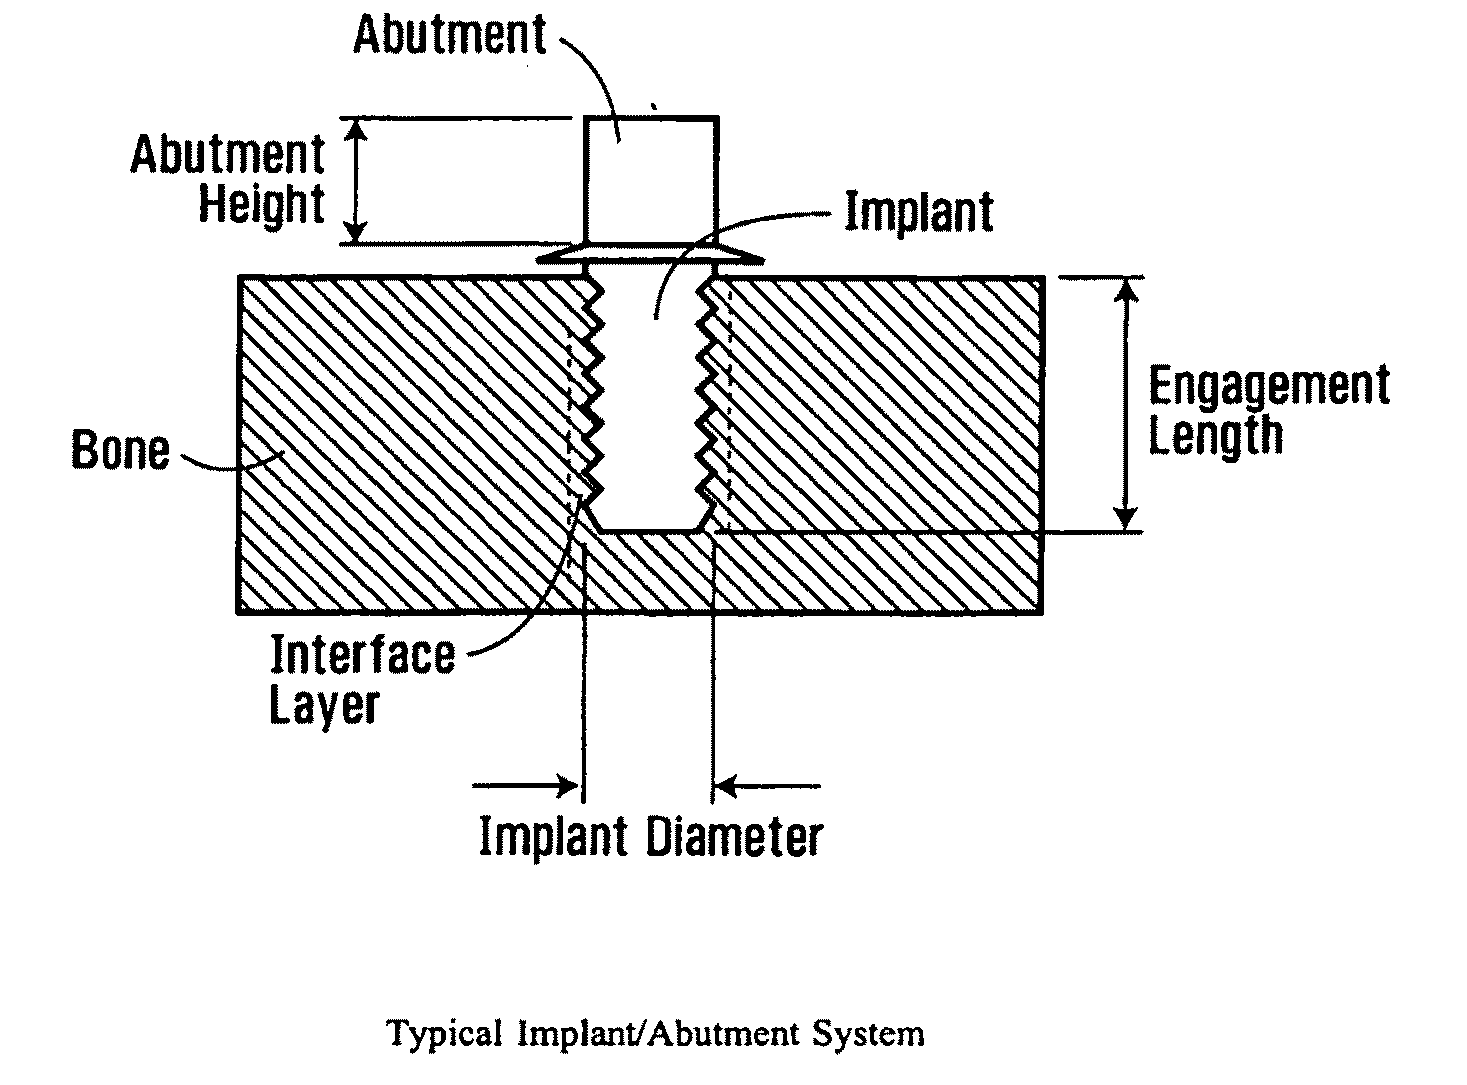 Apparatus and method for assessing percutaneous implant integrity